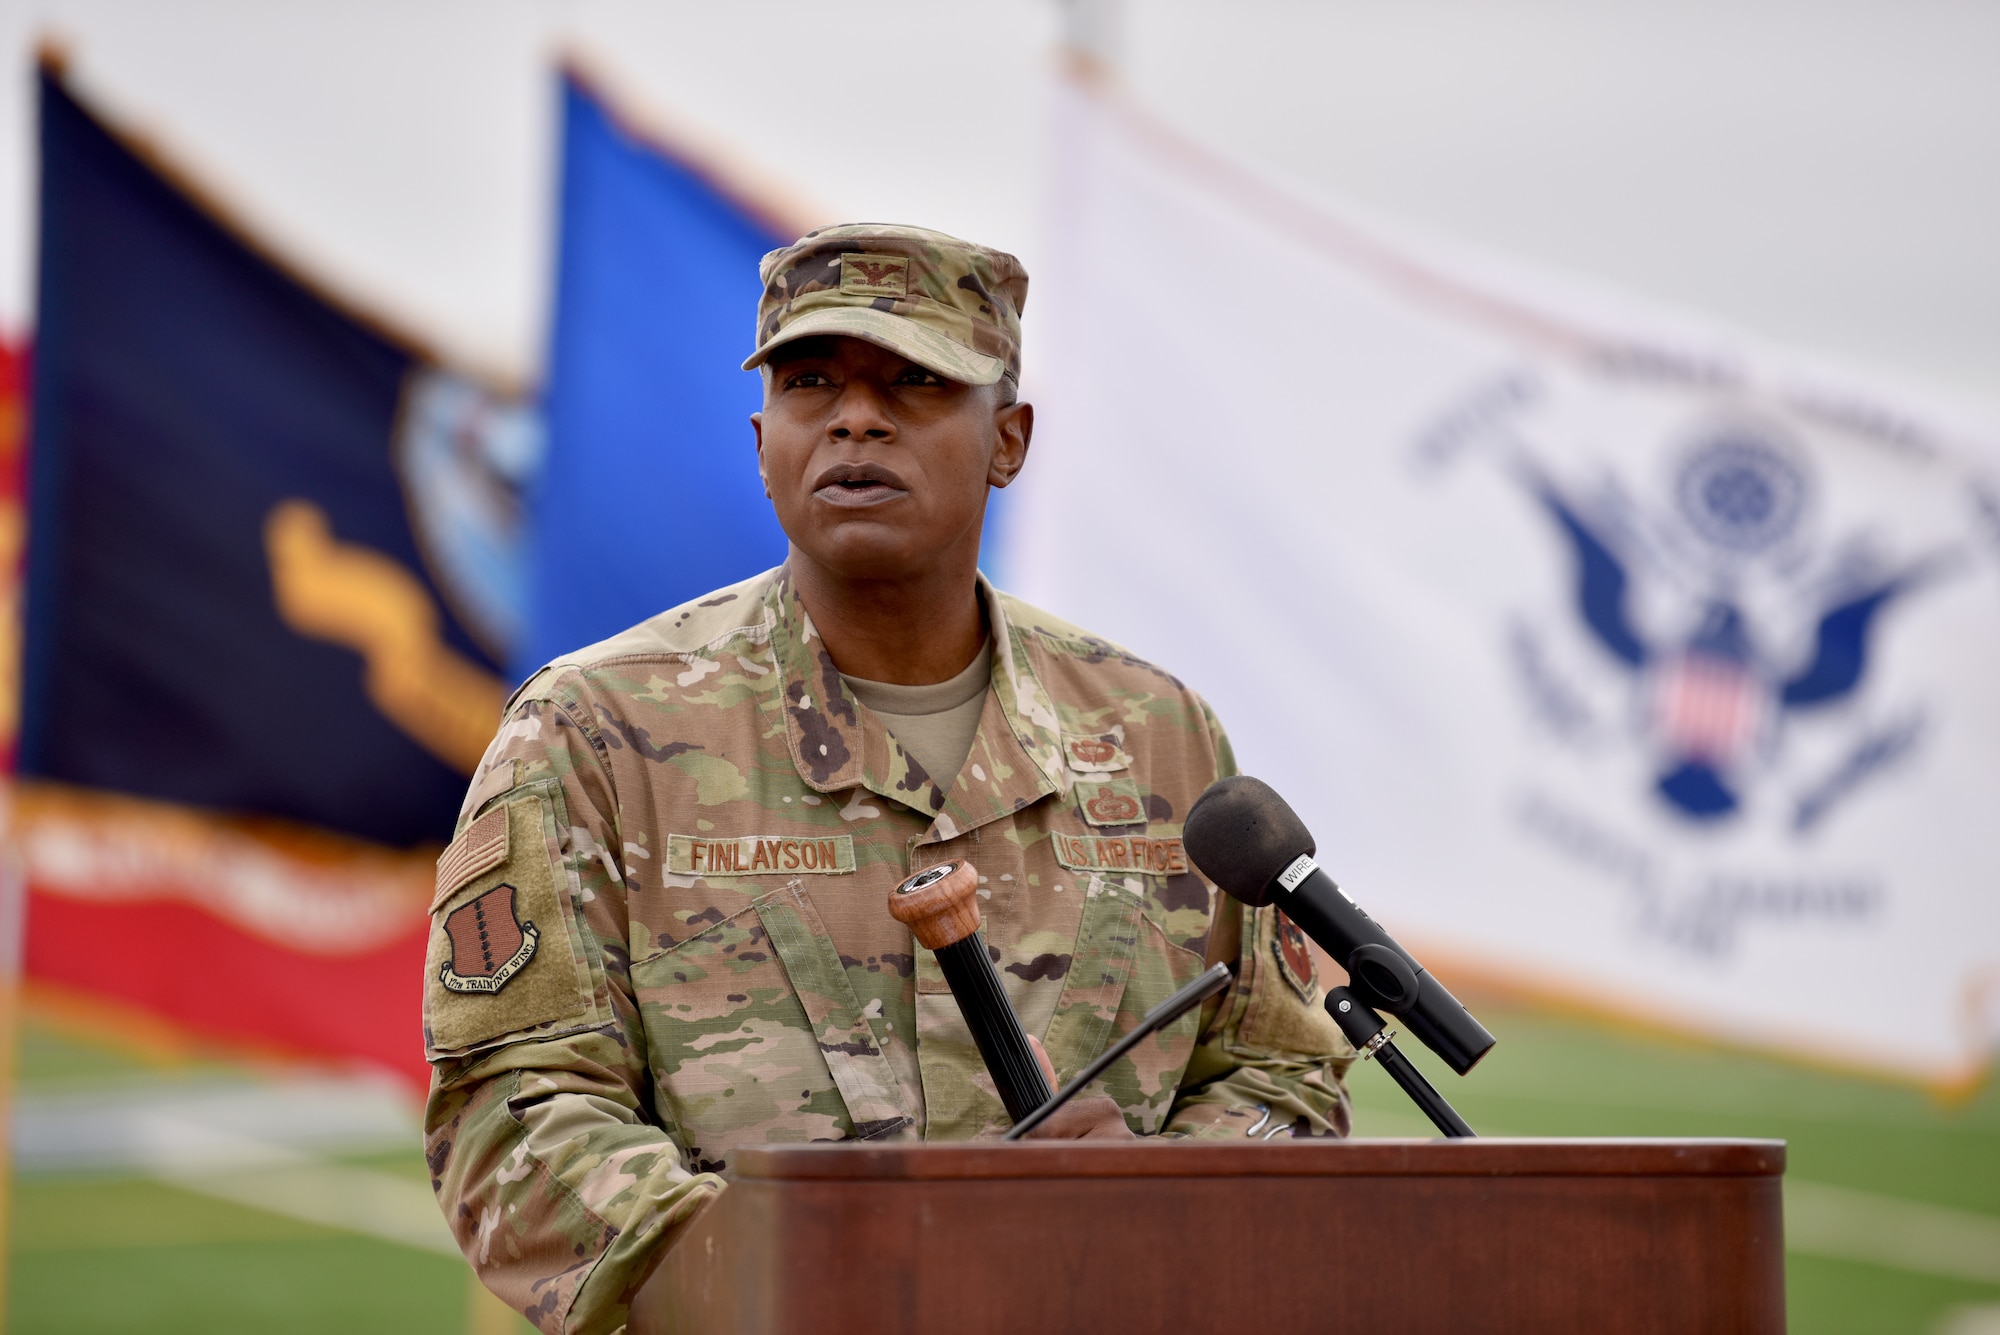 U.S. Air Force Col. James Finlayson, 17th Training Wing vice commander, delivers opening remarks at the Prisoner of War and Missing in Action 24 hour remembrance run on the Mathis Fitness Center track on Goodfellow Air Force Base, Texas, Nov. 13, 2020. Finlayson spoke about the courage that men and women in POW-MIA positions must have and how to learn from them. (U.S. Air Force photo by Staff Sgt. Seraiah Wolf)